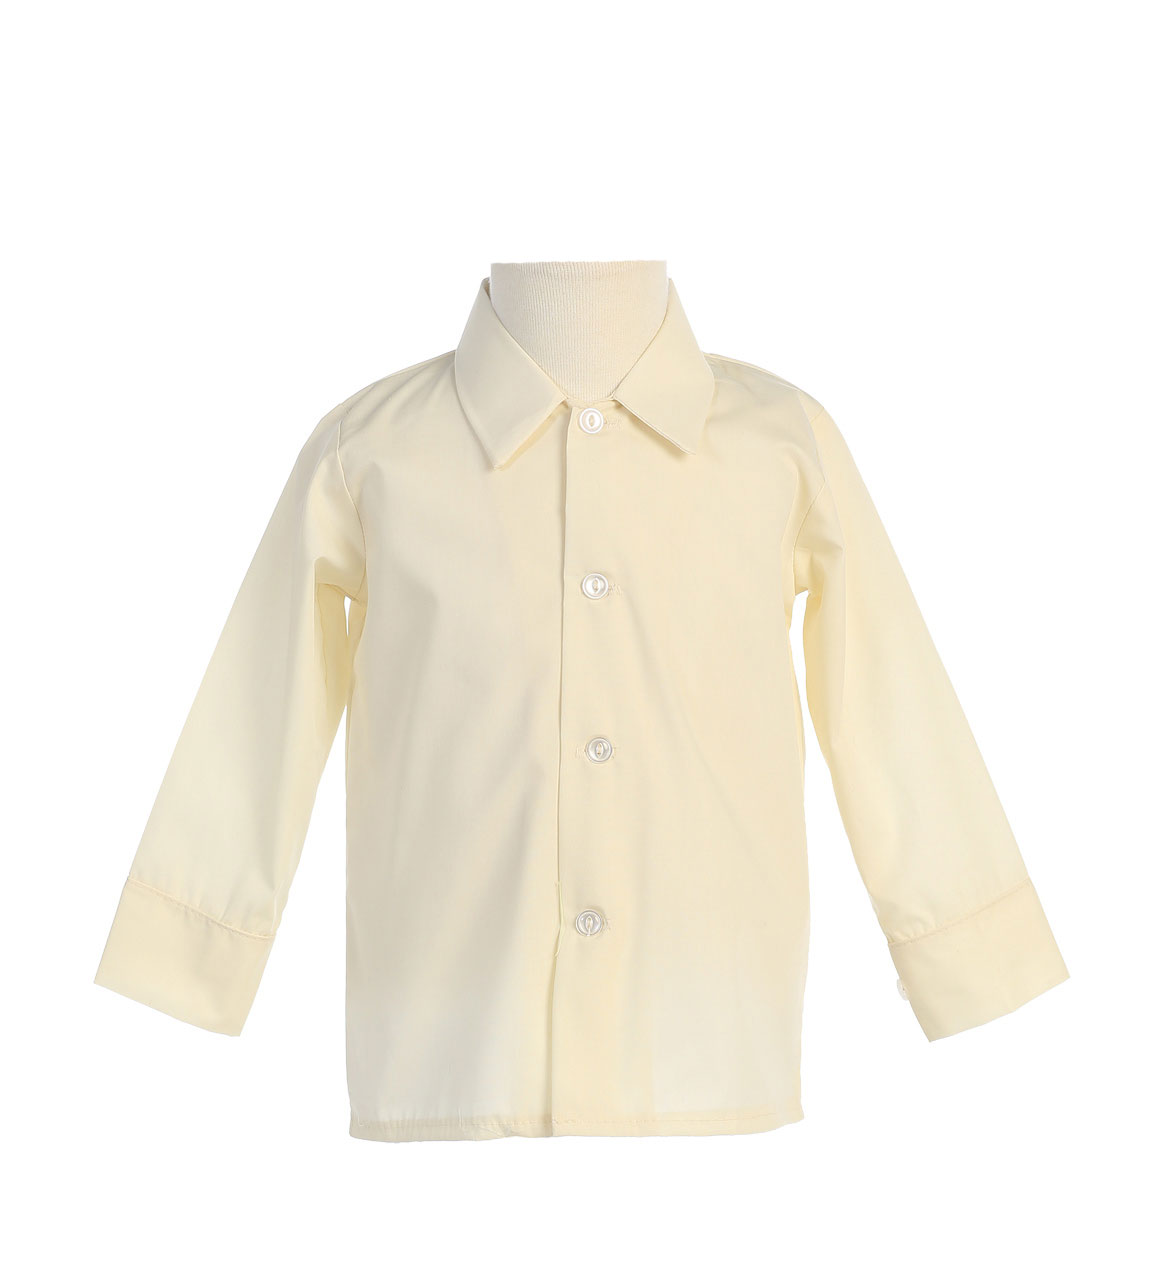 Boys Long Sleeved Simple Dress Shirt - Available in Ivory 4T